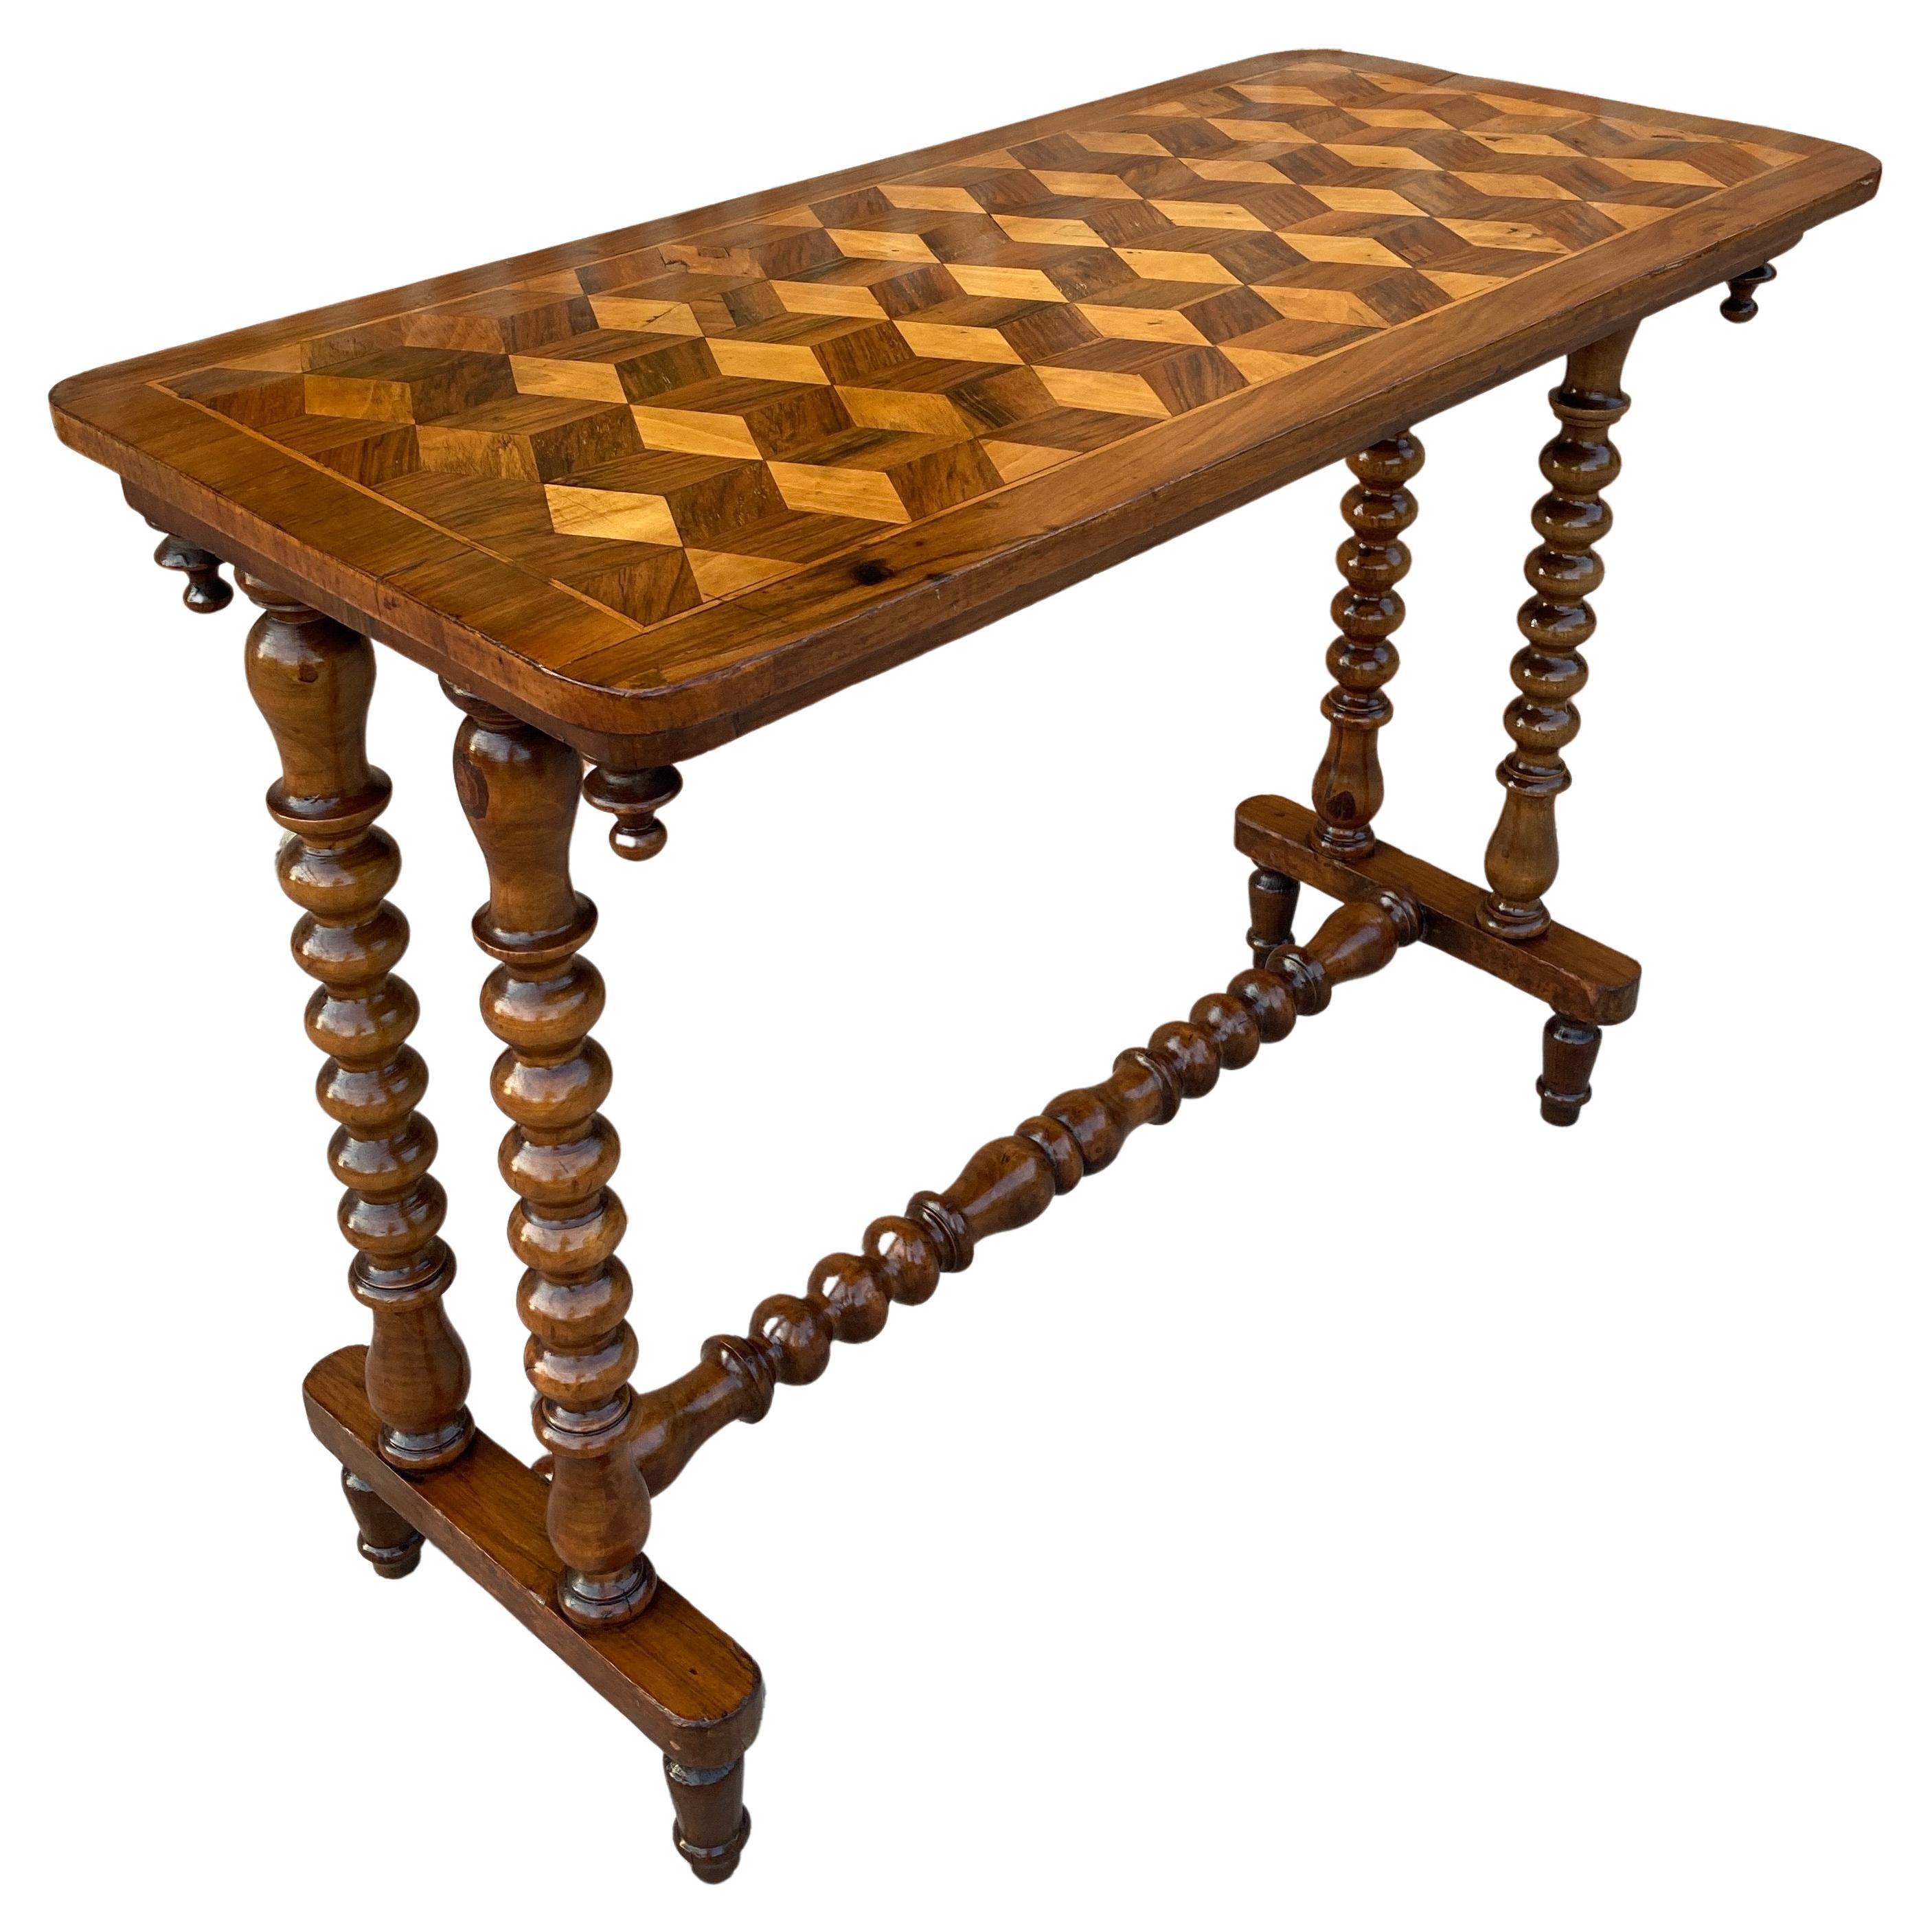 19th Century Spanish Console Table with Parquetry Top and Turned Legs